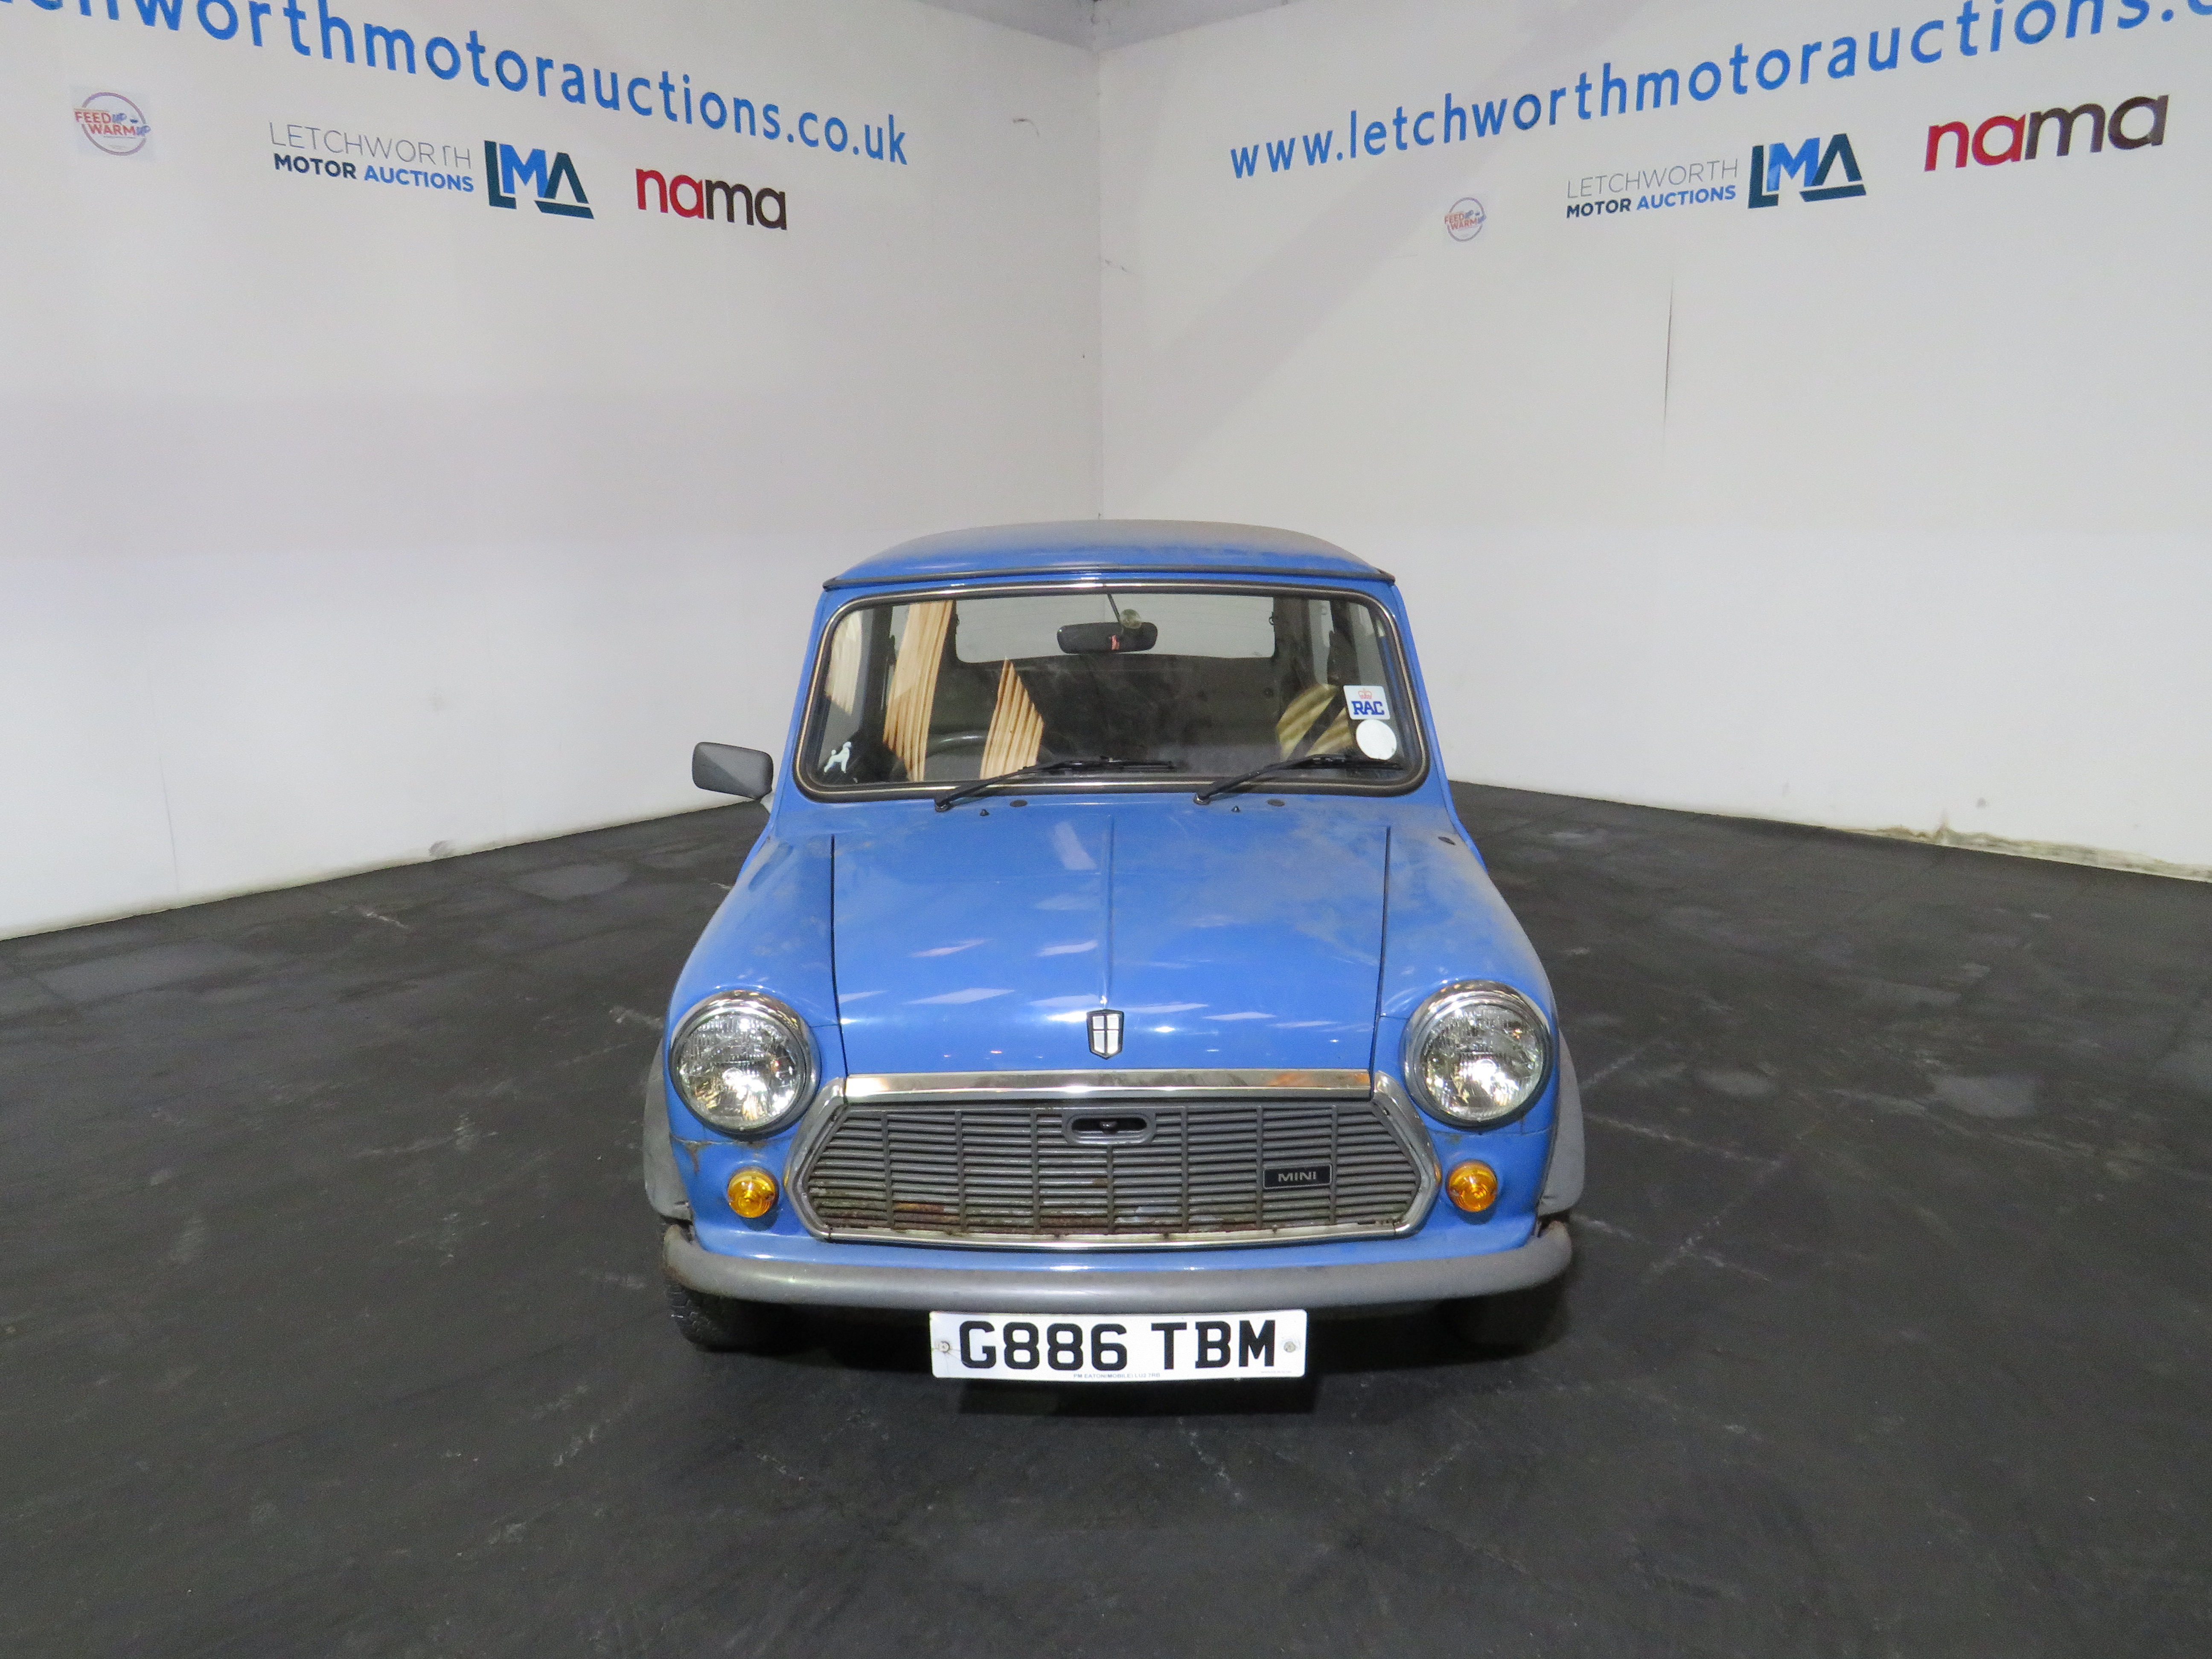 1989 Austin Mini 1000 City E - 998cc - ONE OWNER FROM NEW - Image 2 of 17